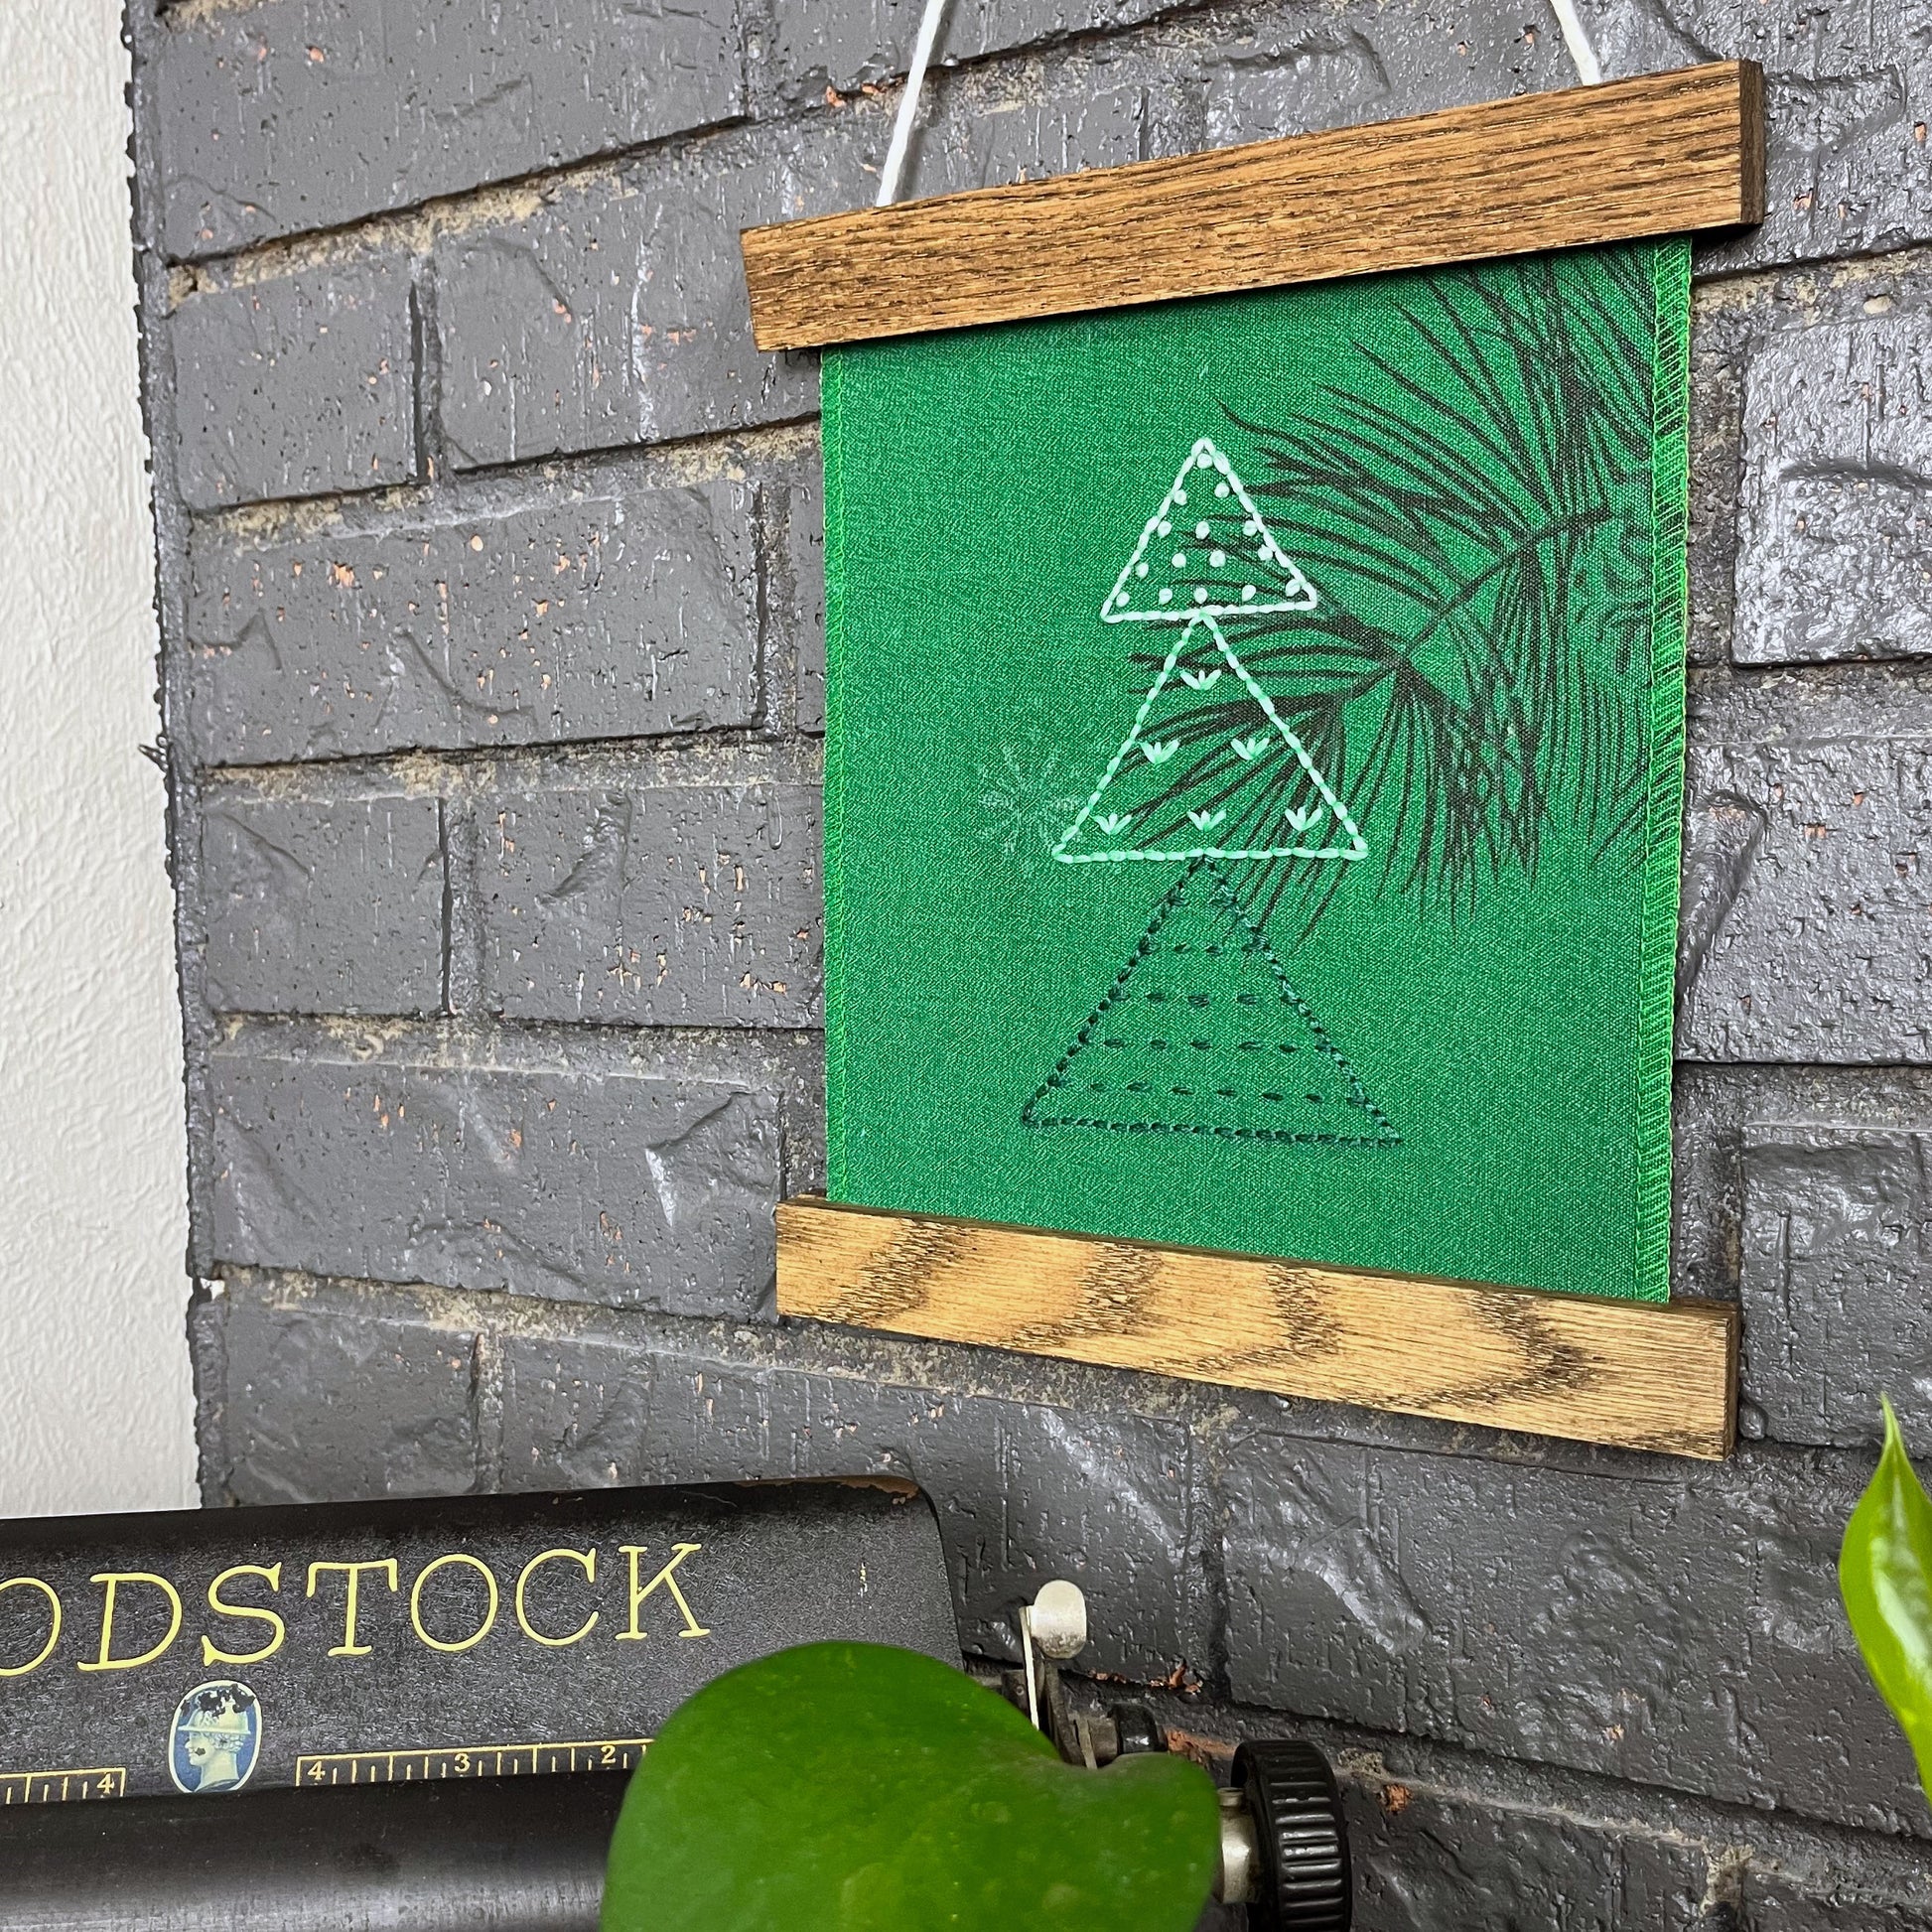 a fabric wall hanging in a magnetic wood frame, made from bright green fabric with a pine branch printed on it, and stitched over with Christmas trees made from three triangles, each triangle filled with different types of stitches in shades of green